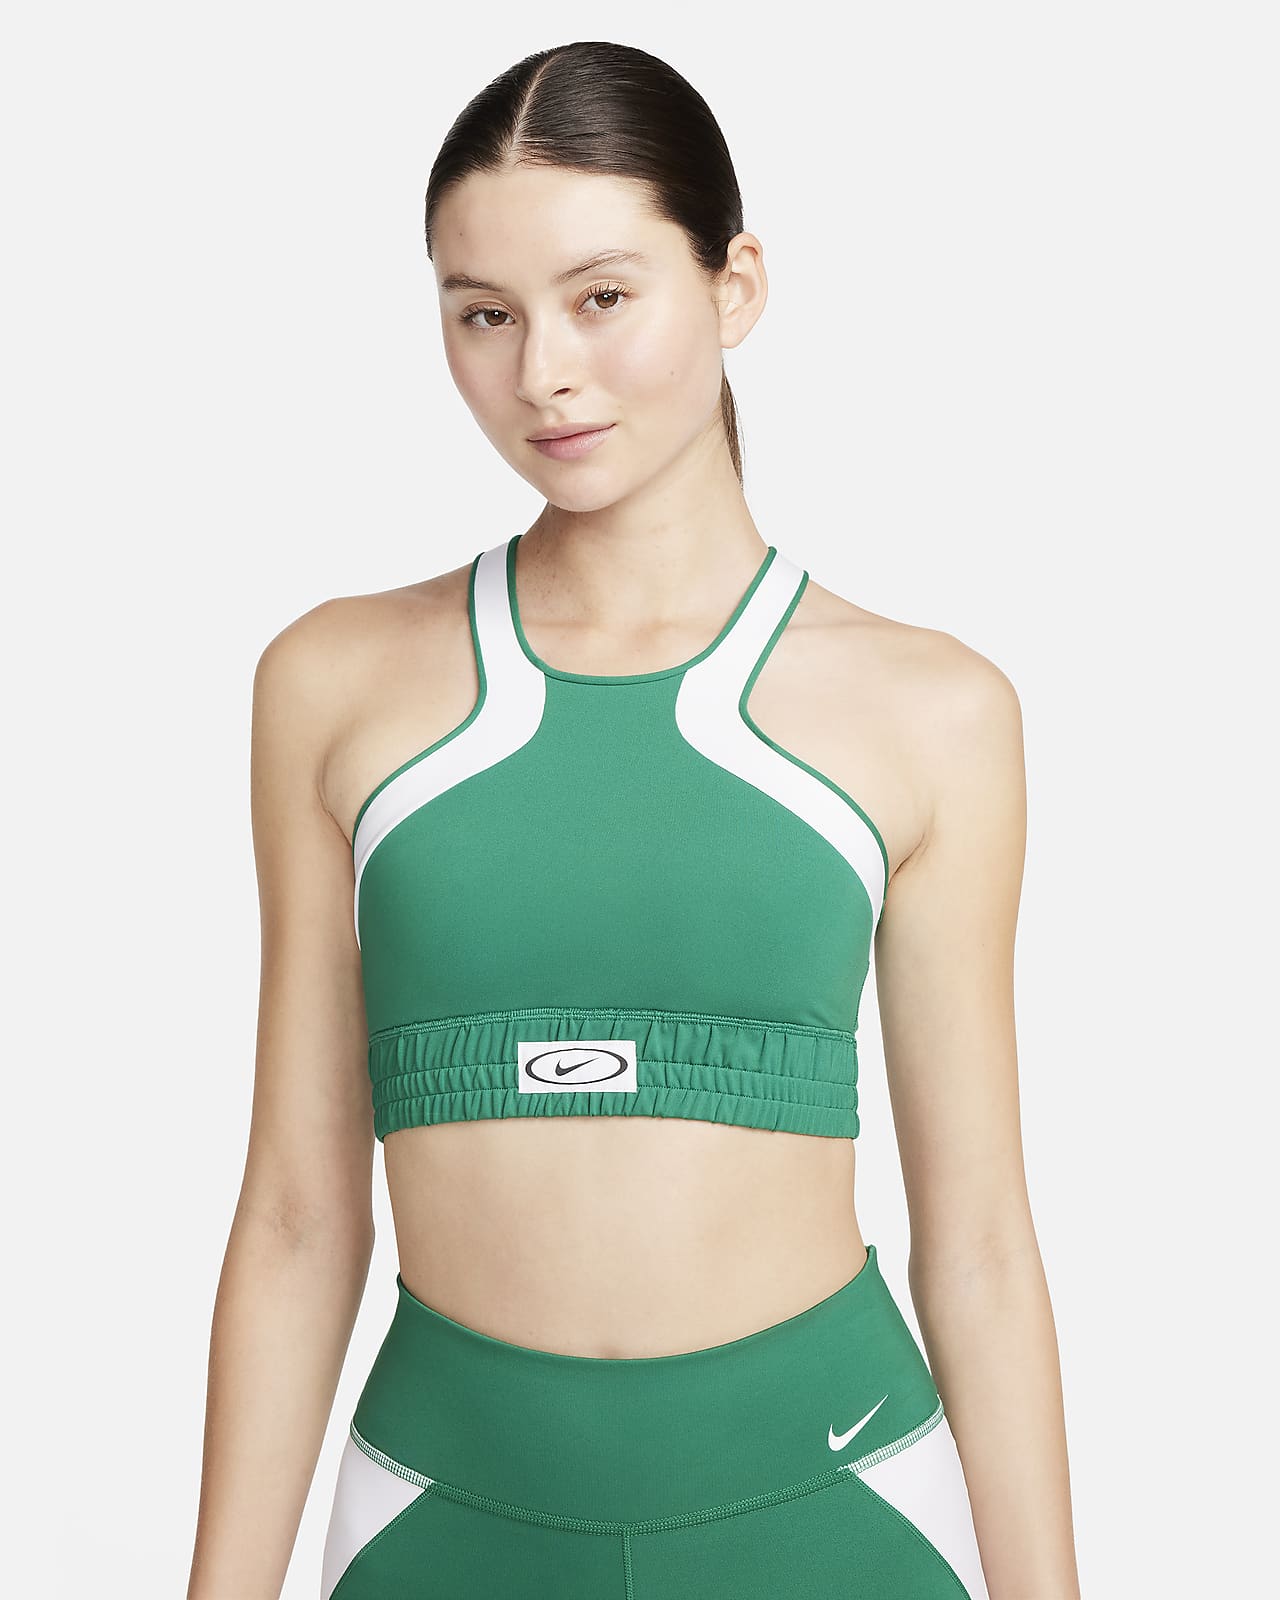 https://static.nike.com/a/images/t_PDP_1280_v1/f_auto,q_auto:eco/86ca826b-1787-4dae-b91e-8c5760e4dd31/high-neck-womens-medium-support-lightly-lined-color-block-sports-bra-9Cj153.png